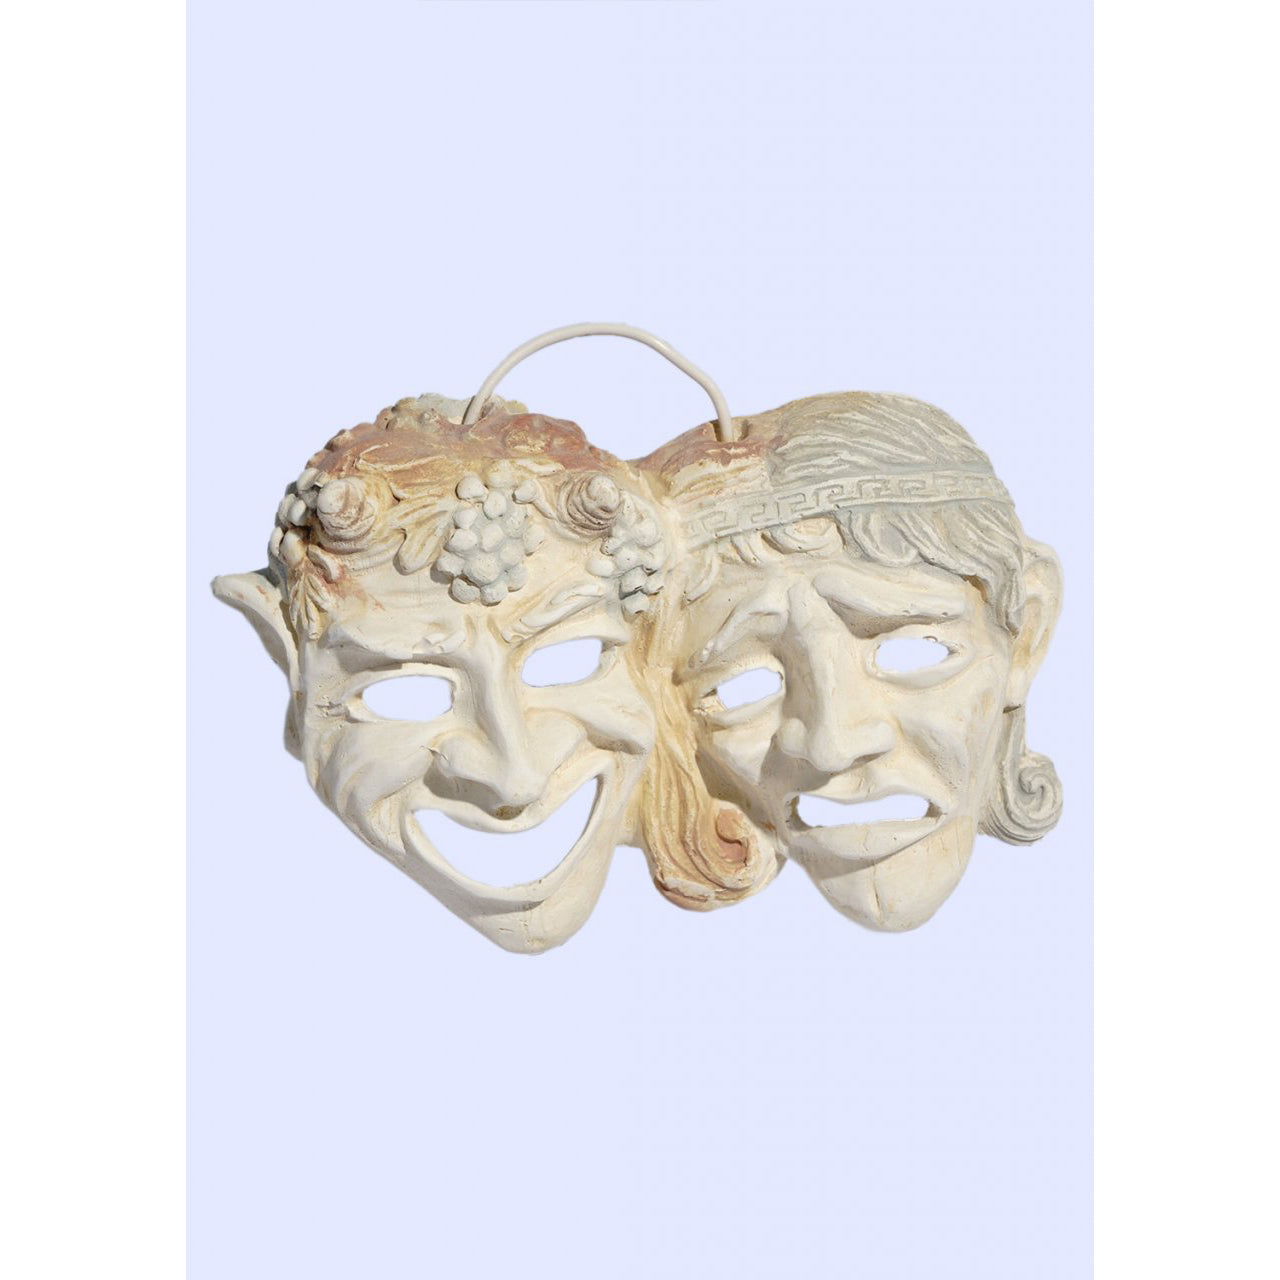 Comedy Tragedy Mask' Water Bottle